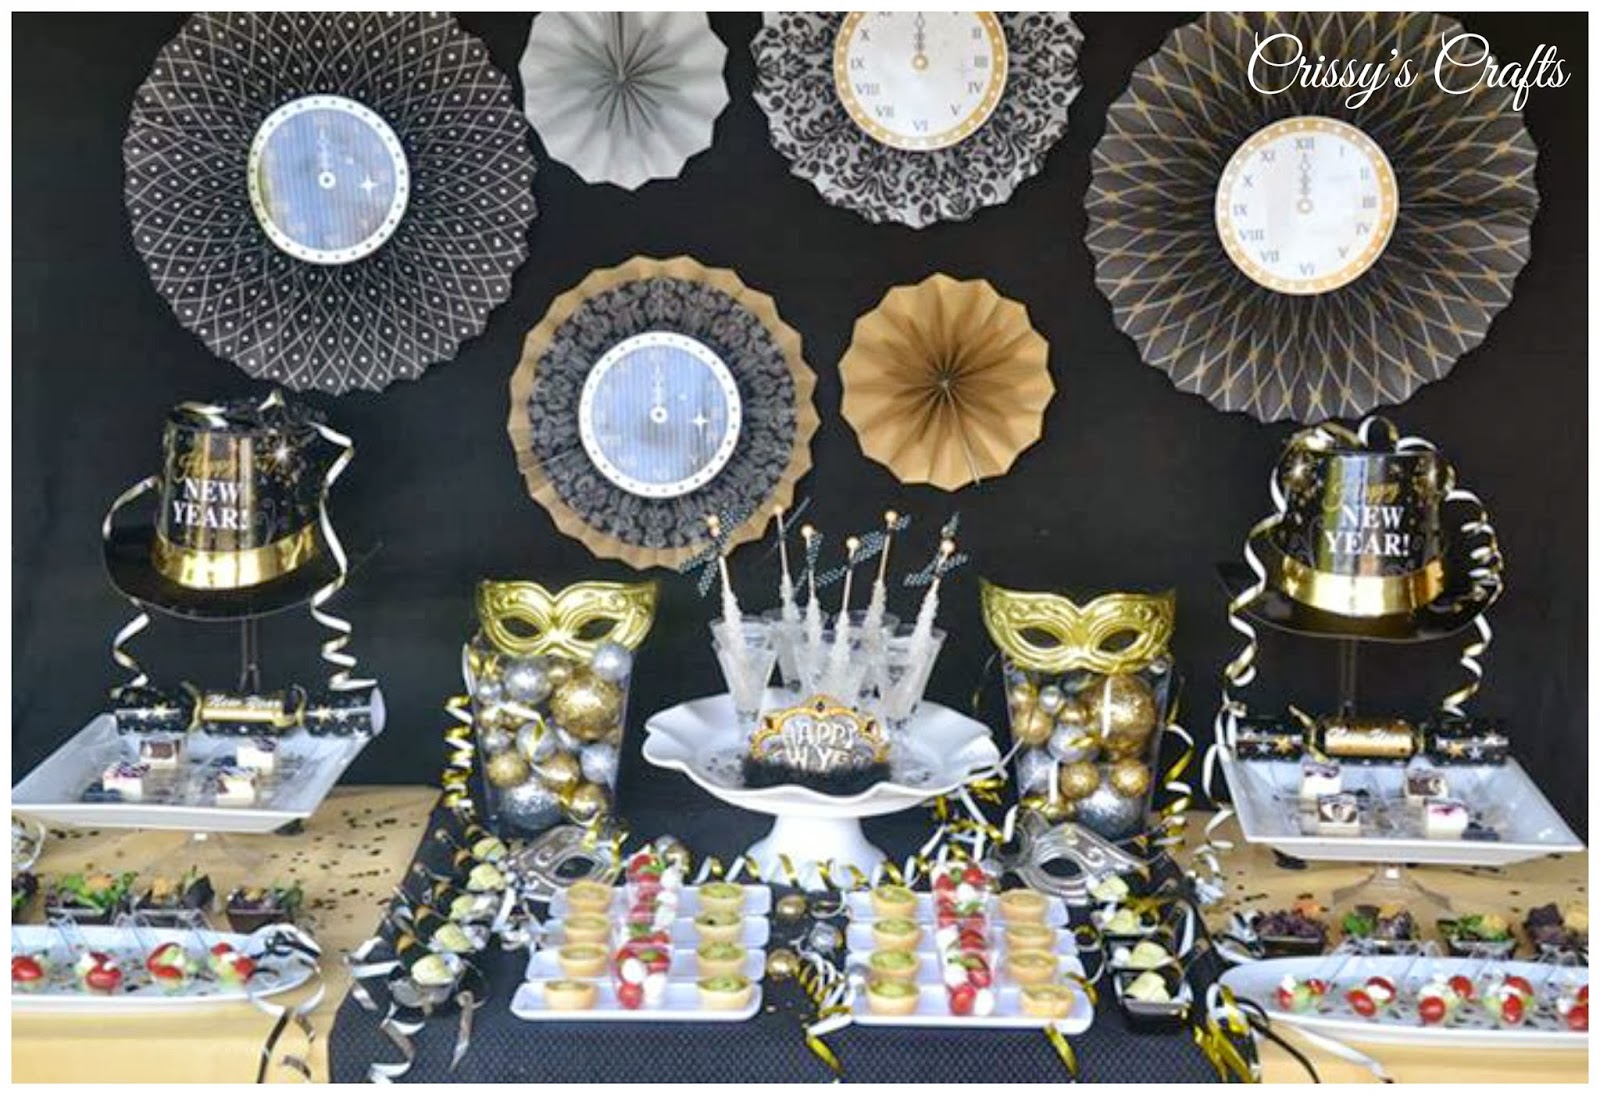 Crissy's Crafts New Years Eve Party Ideas